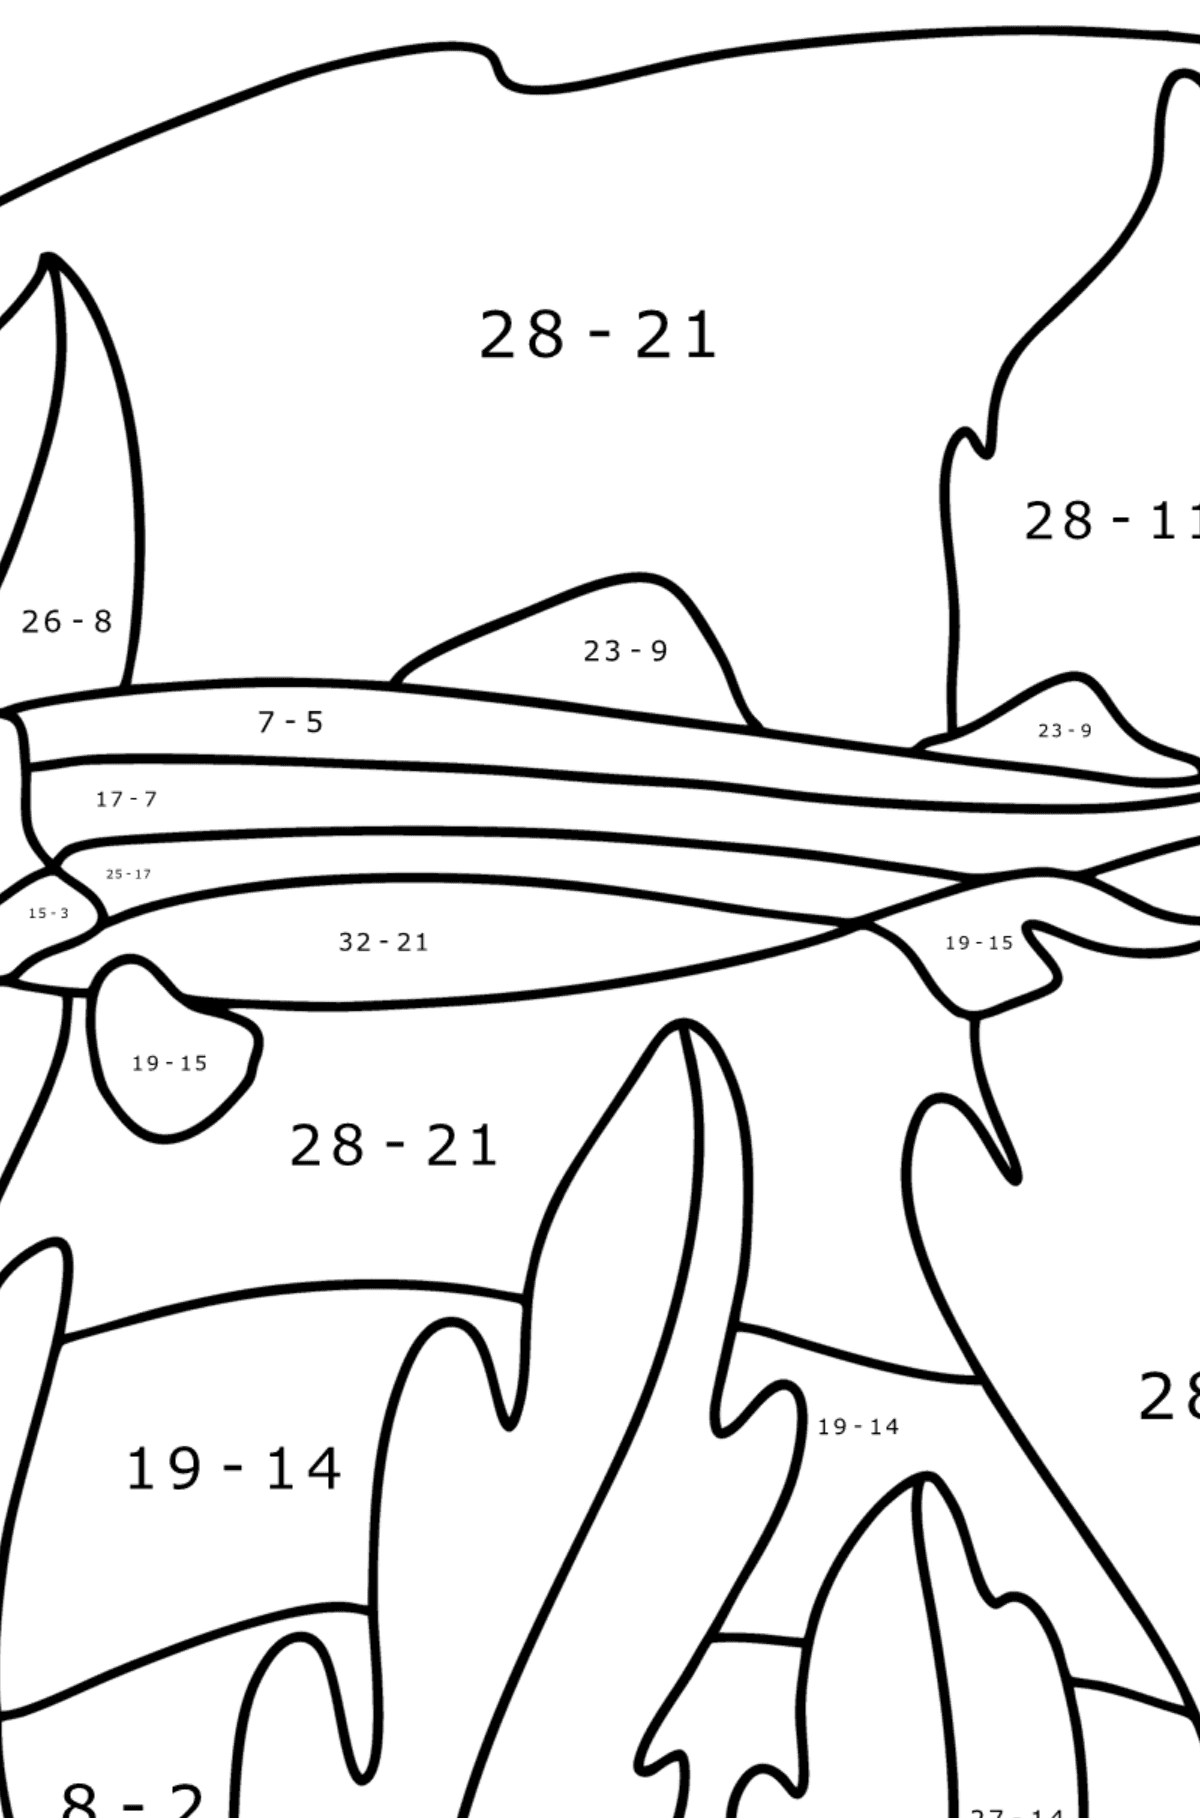 Crocodile Shark coloring page - Math Coloring - Subtraction for Kids